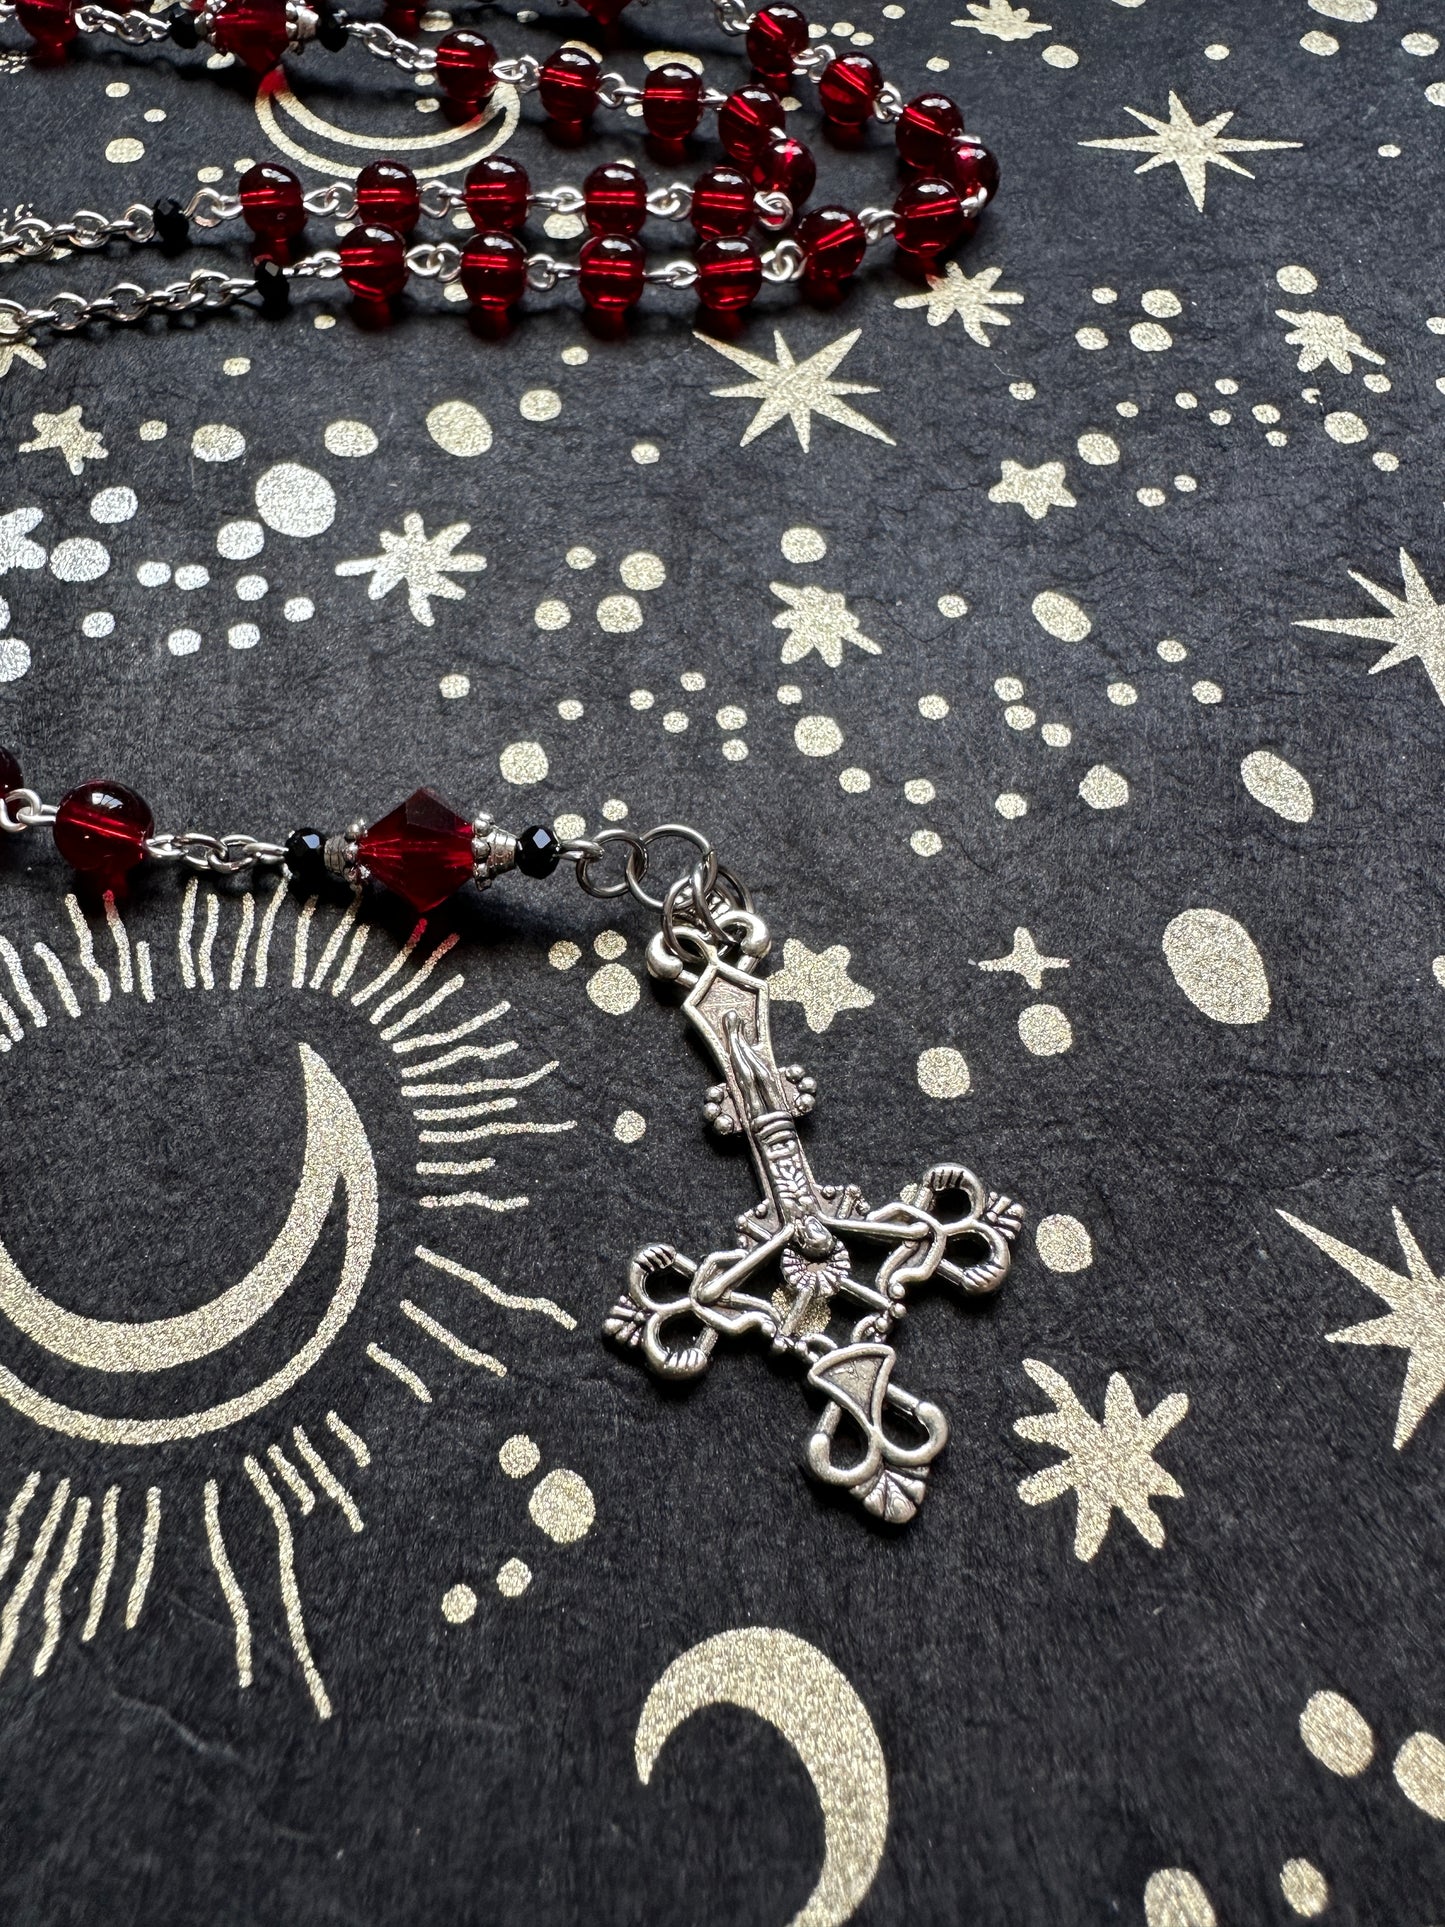 Red glass Unholy Rosary